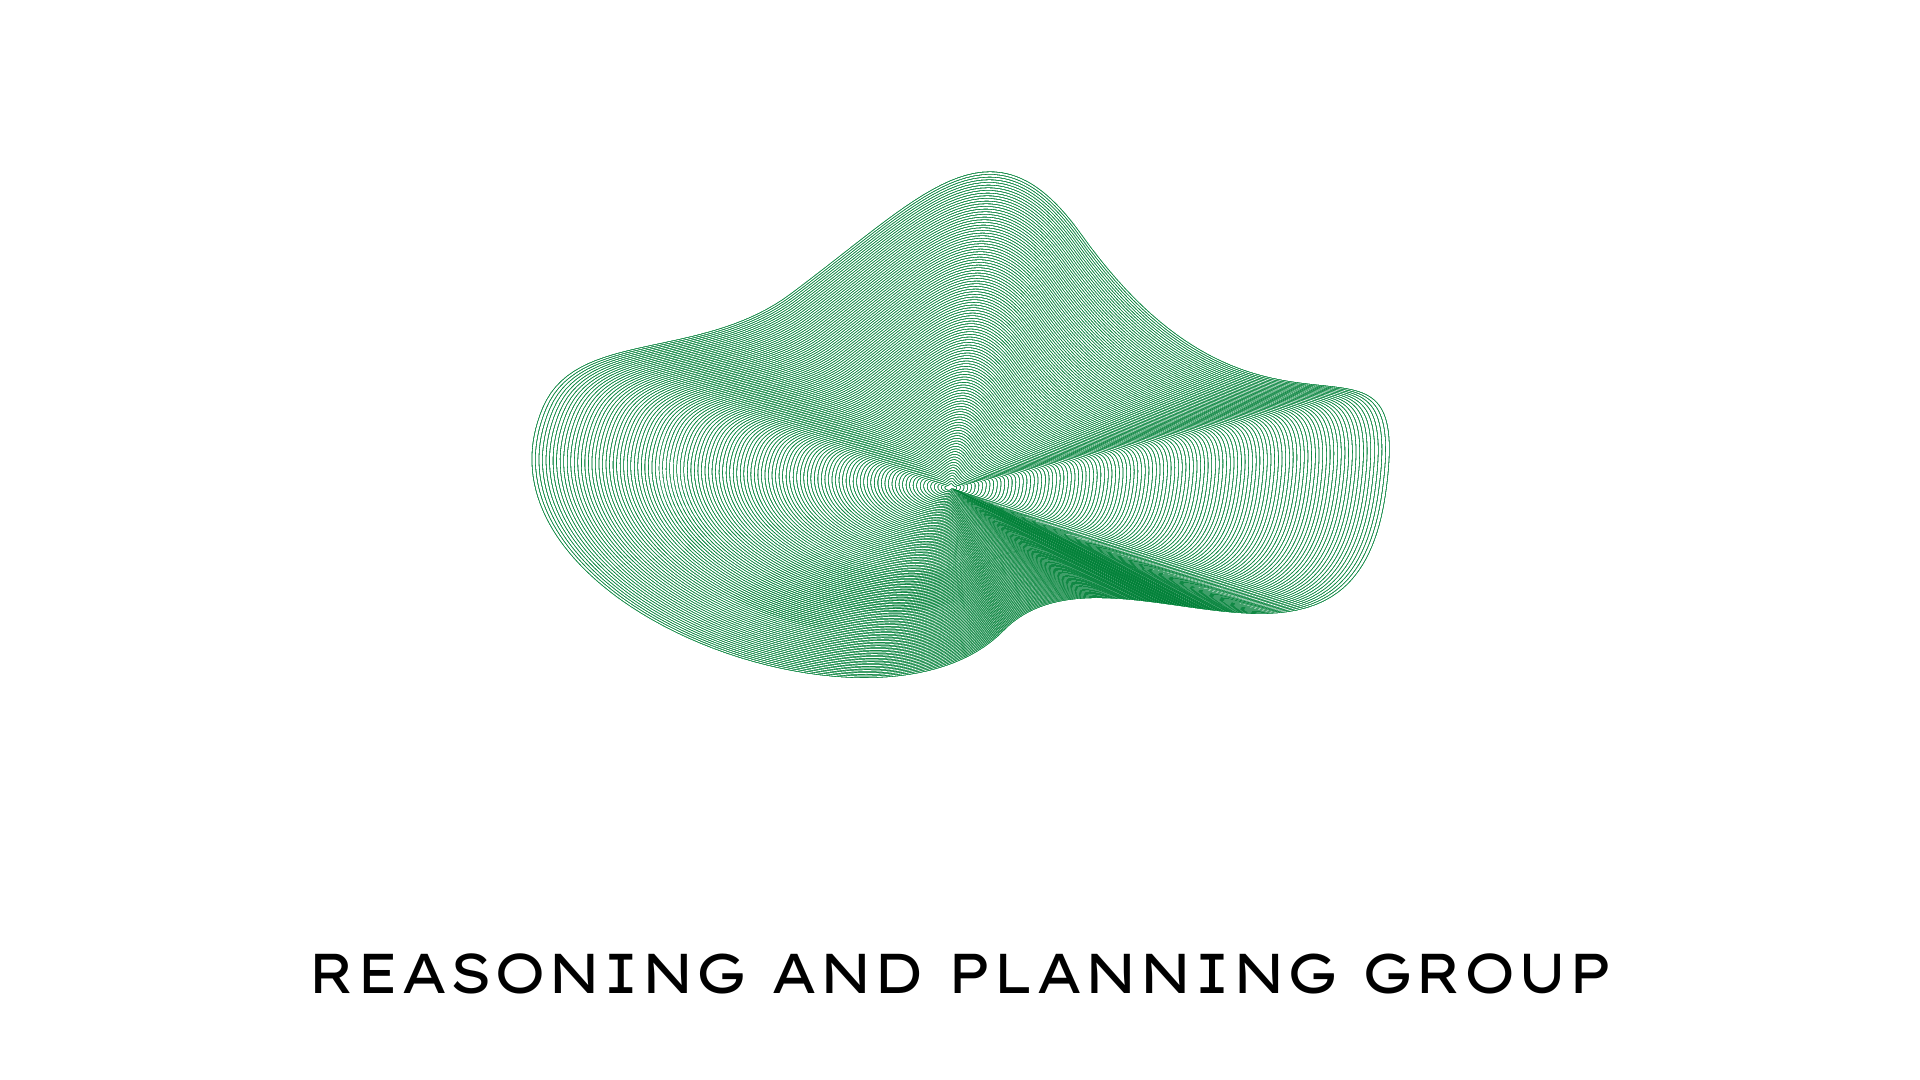 Illustration of Reasoning and Planning Group